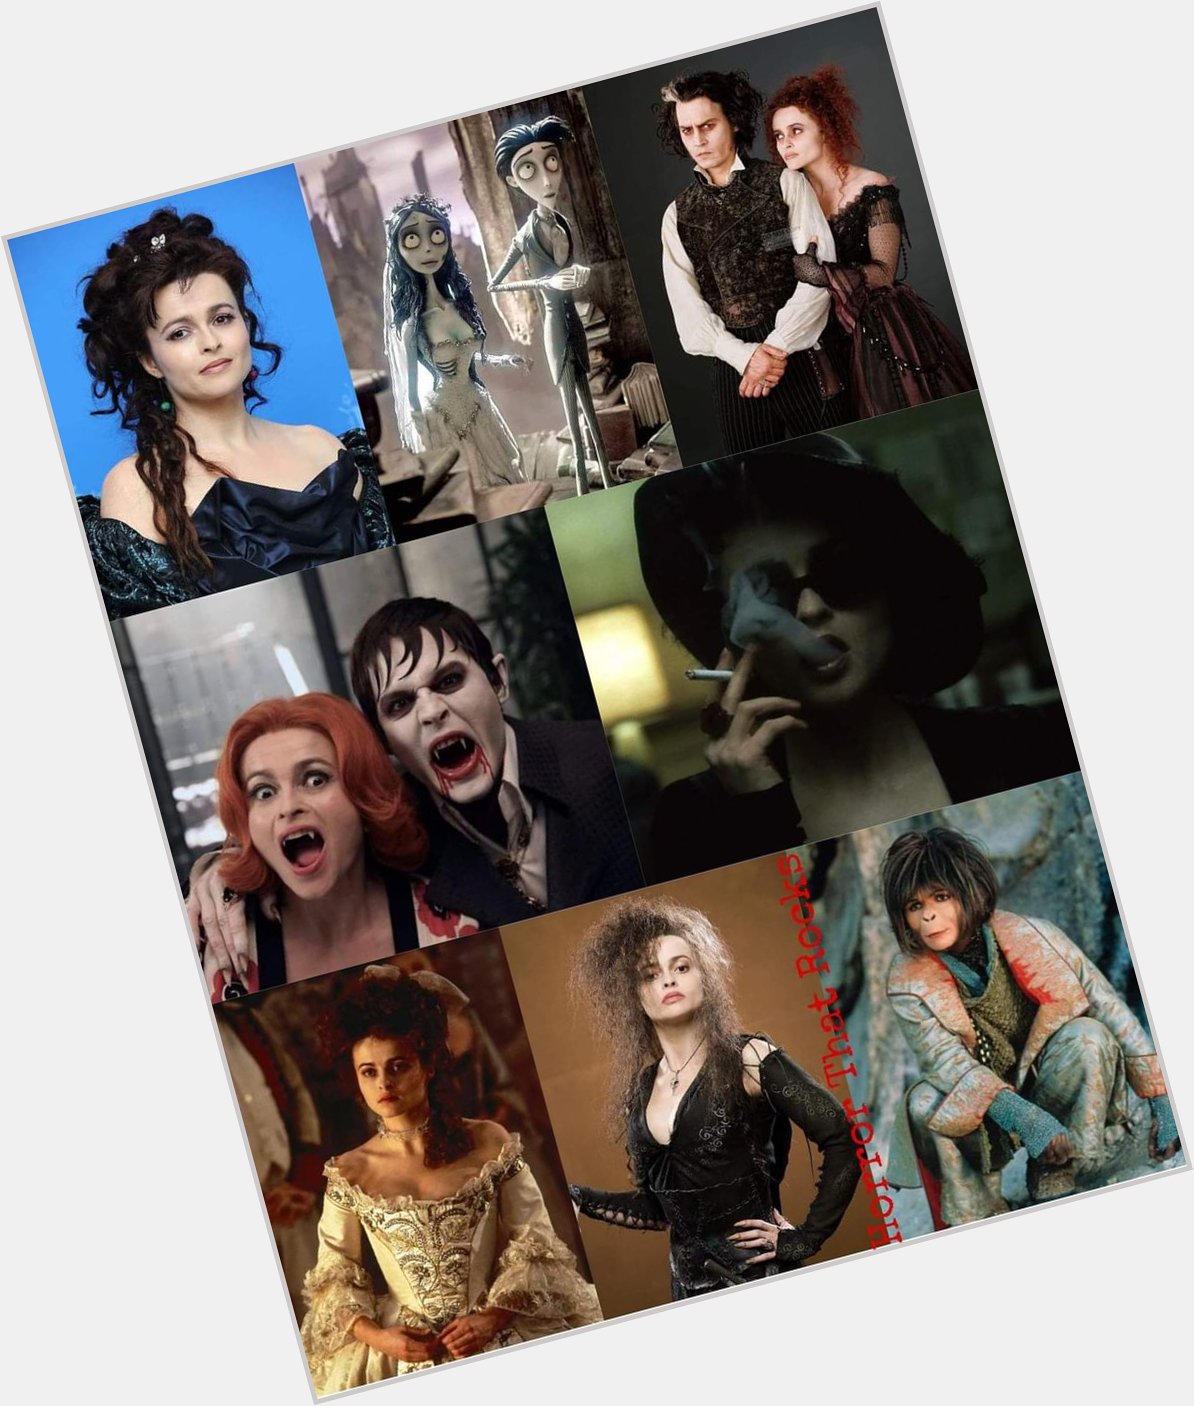 Happy birthday to one of my favourite actresses, the lovely Helena Bonham Carter. 